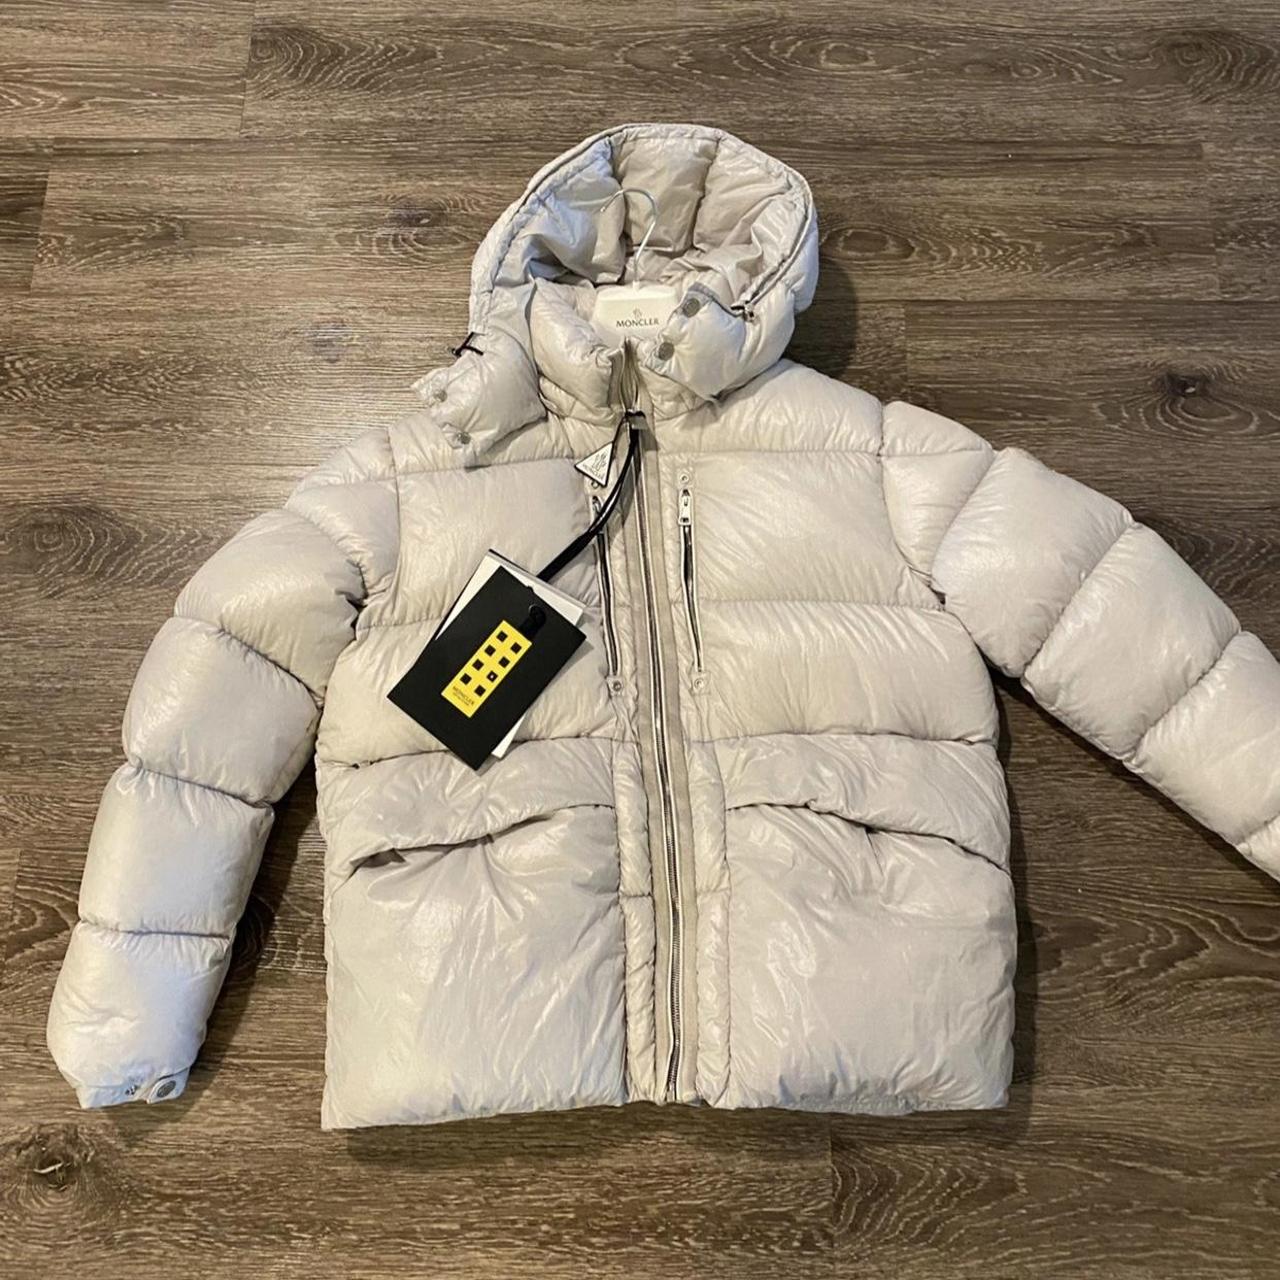 Moncler x 1017 9sm Alyx Hooded forest jacket , Size 3